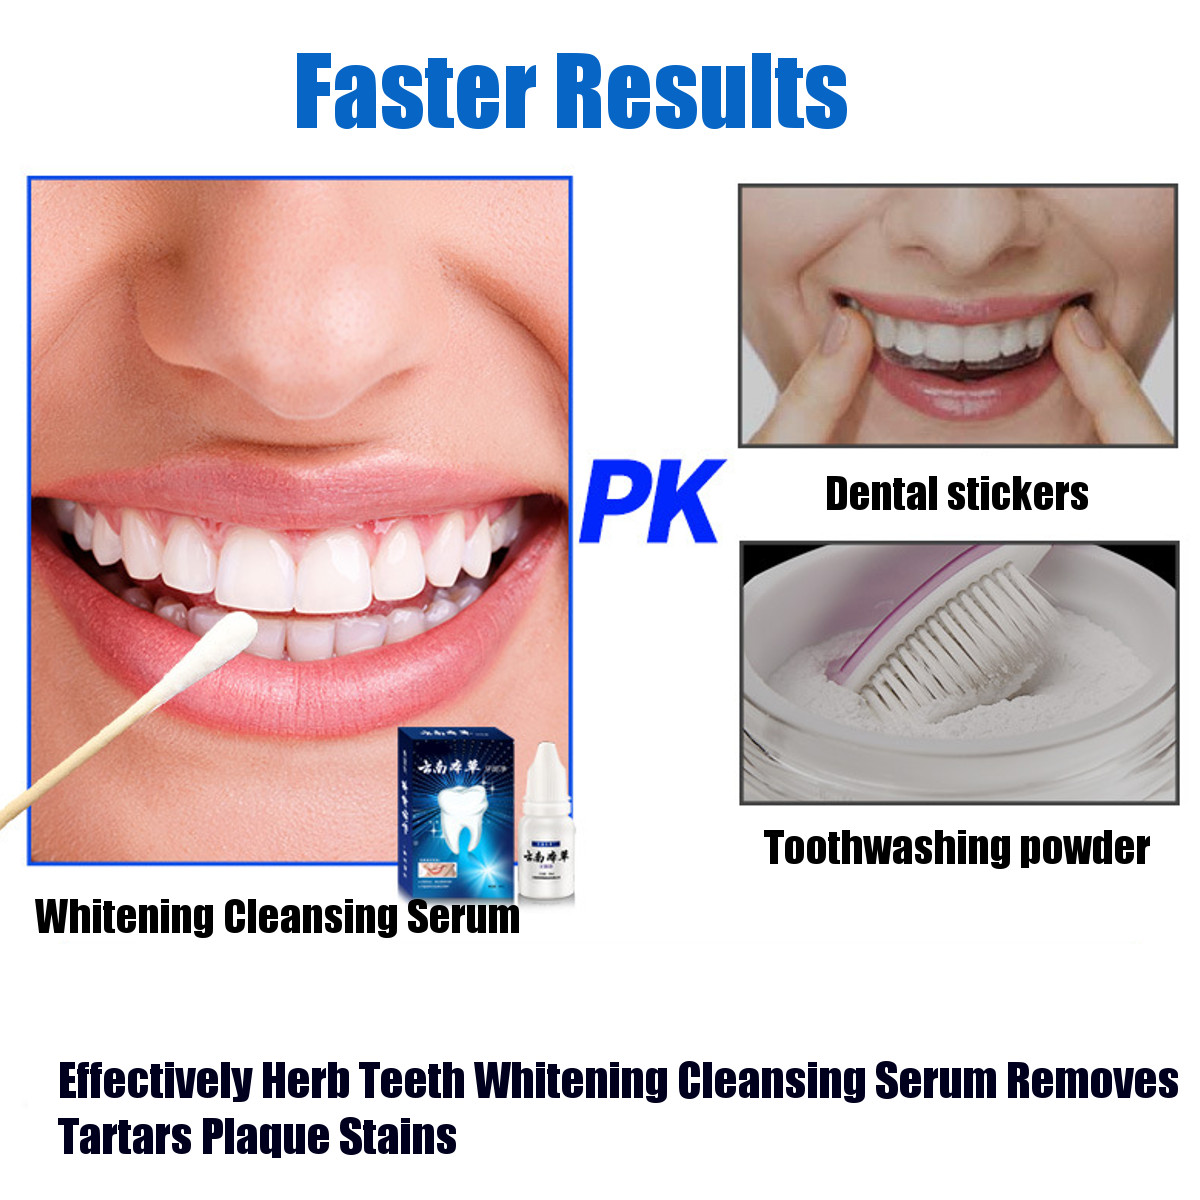 Herb-Teeth-Whitening-Cleansing-Serum-Essence-Oral-Hygiene-Effectively-Removes-Tartars-Plaque-Stains--1815887-6